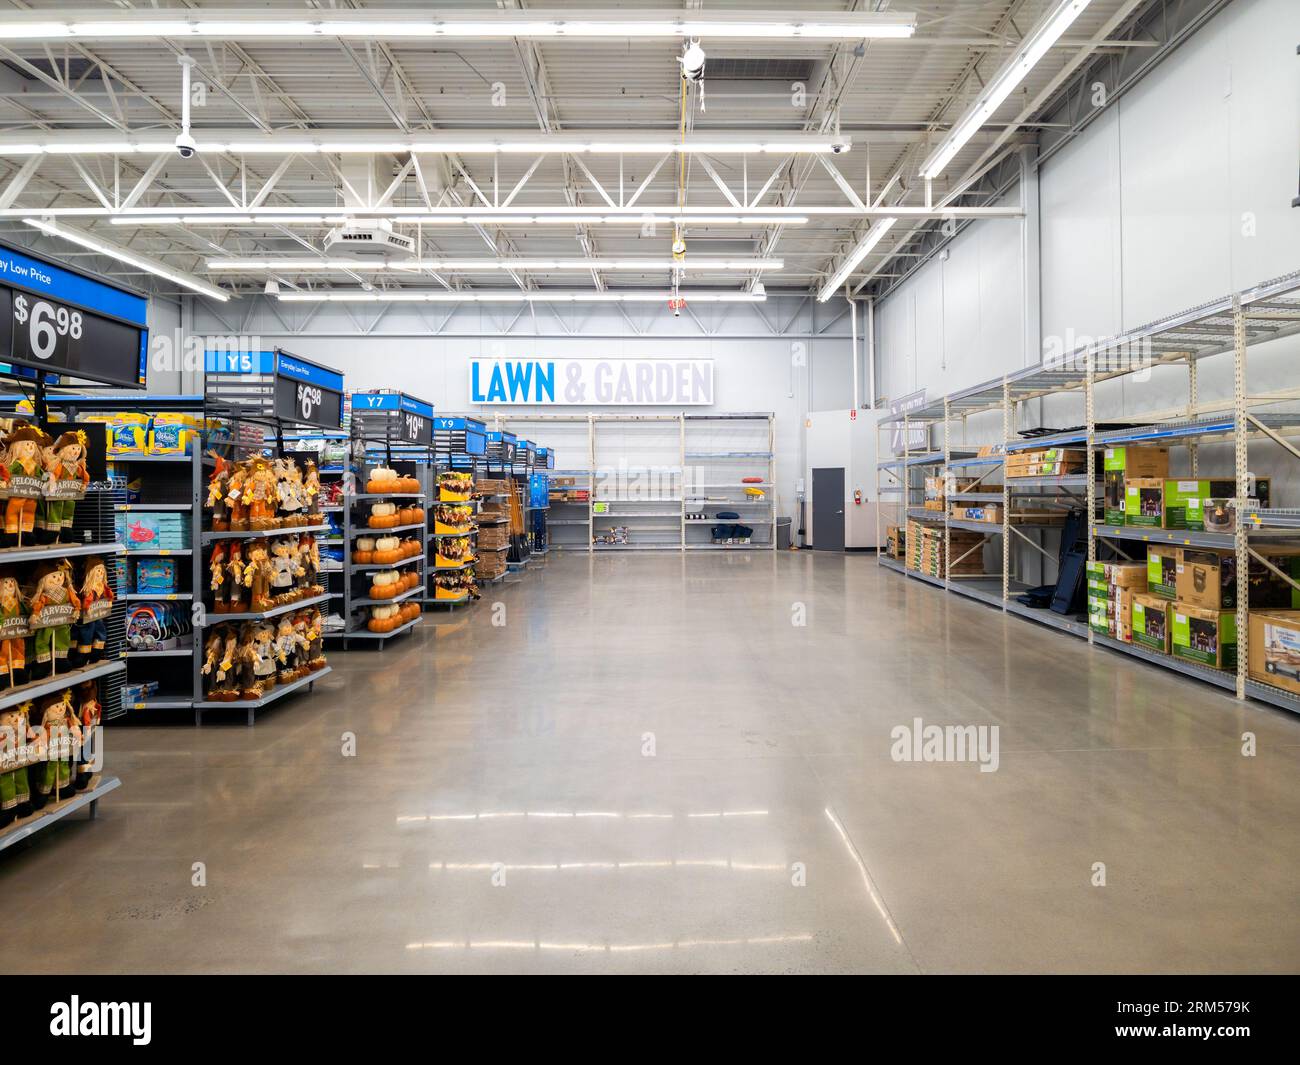 New Hartford, New York - Aug 6, 2023: Close-up View of the Lawn and Garden Department of Walmart Super Center. Stock Photo